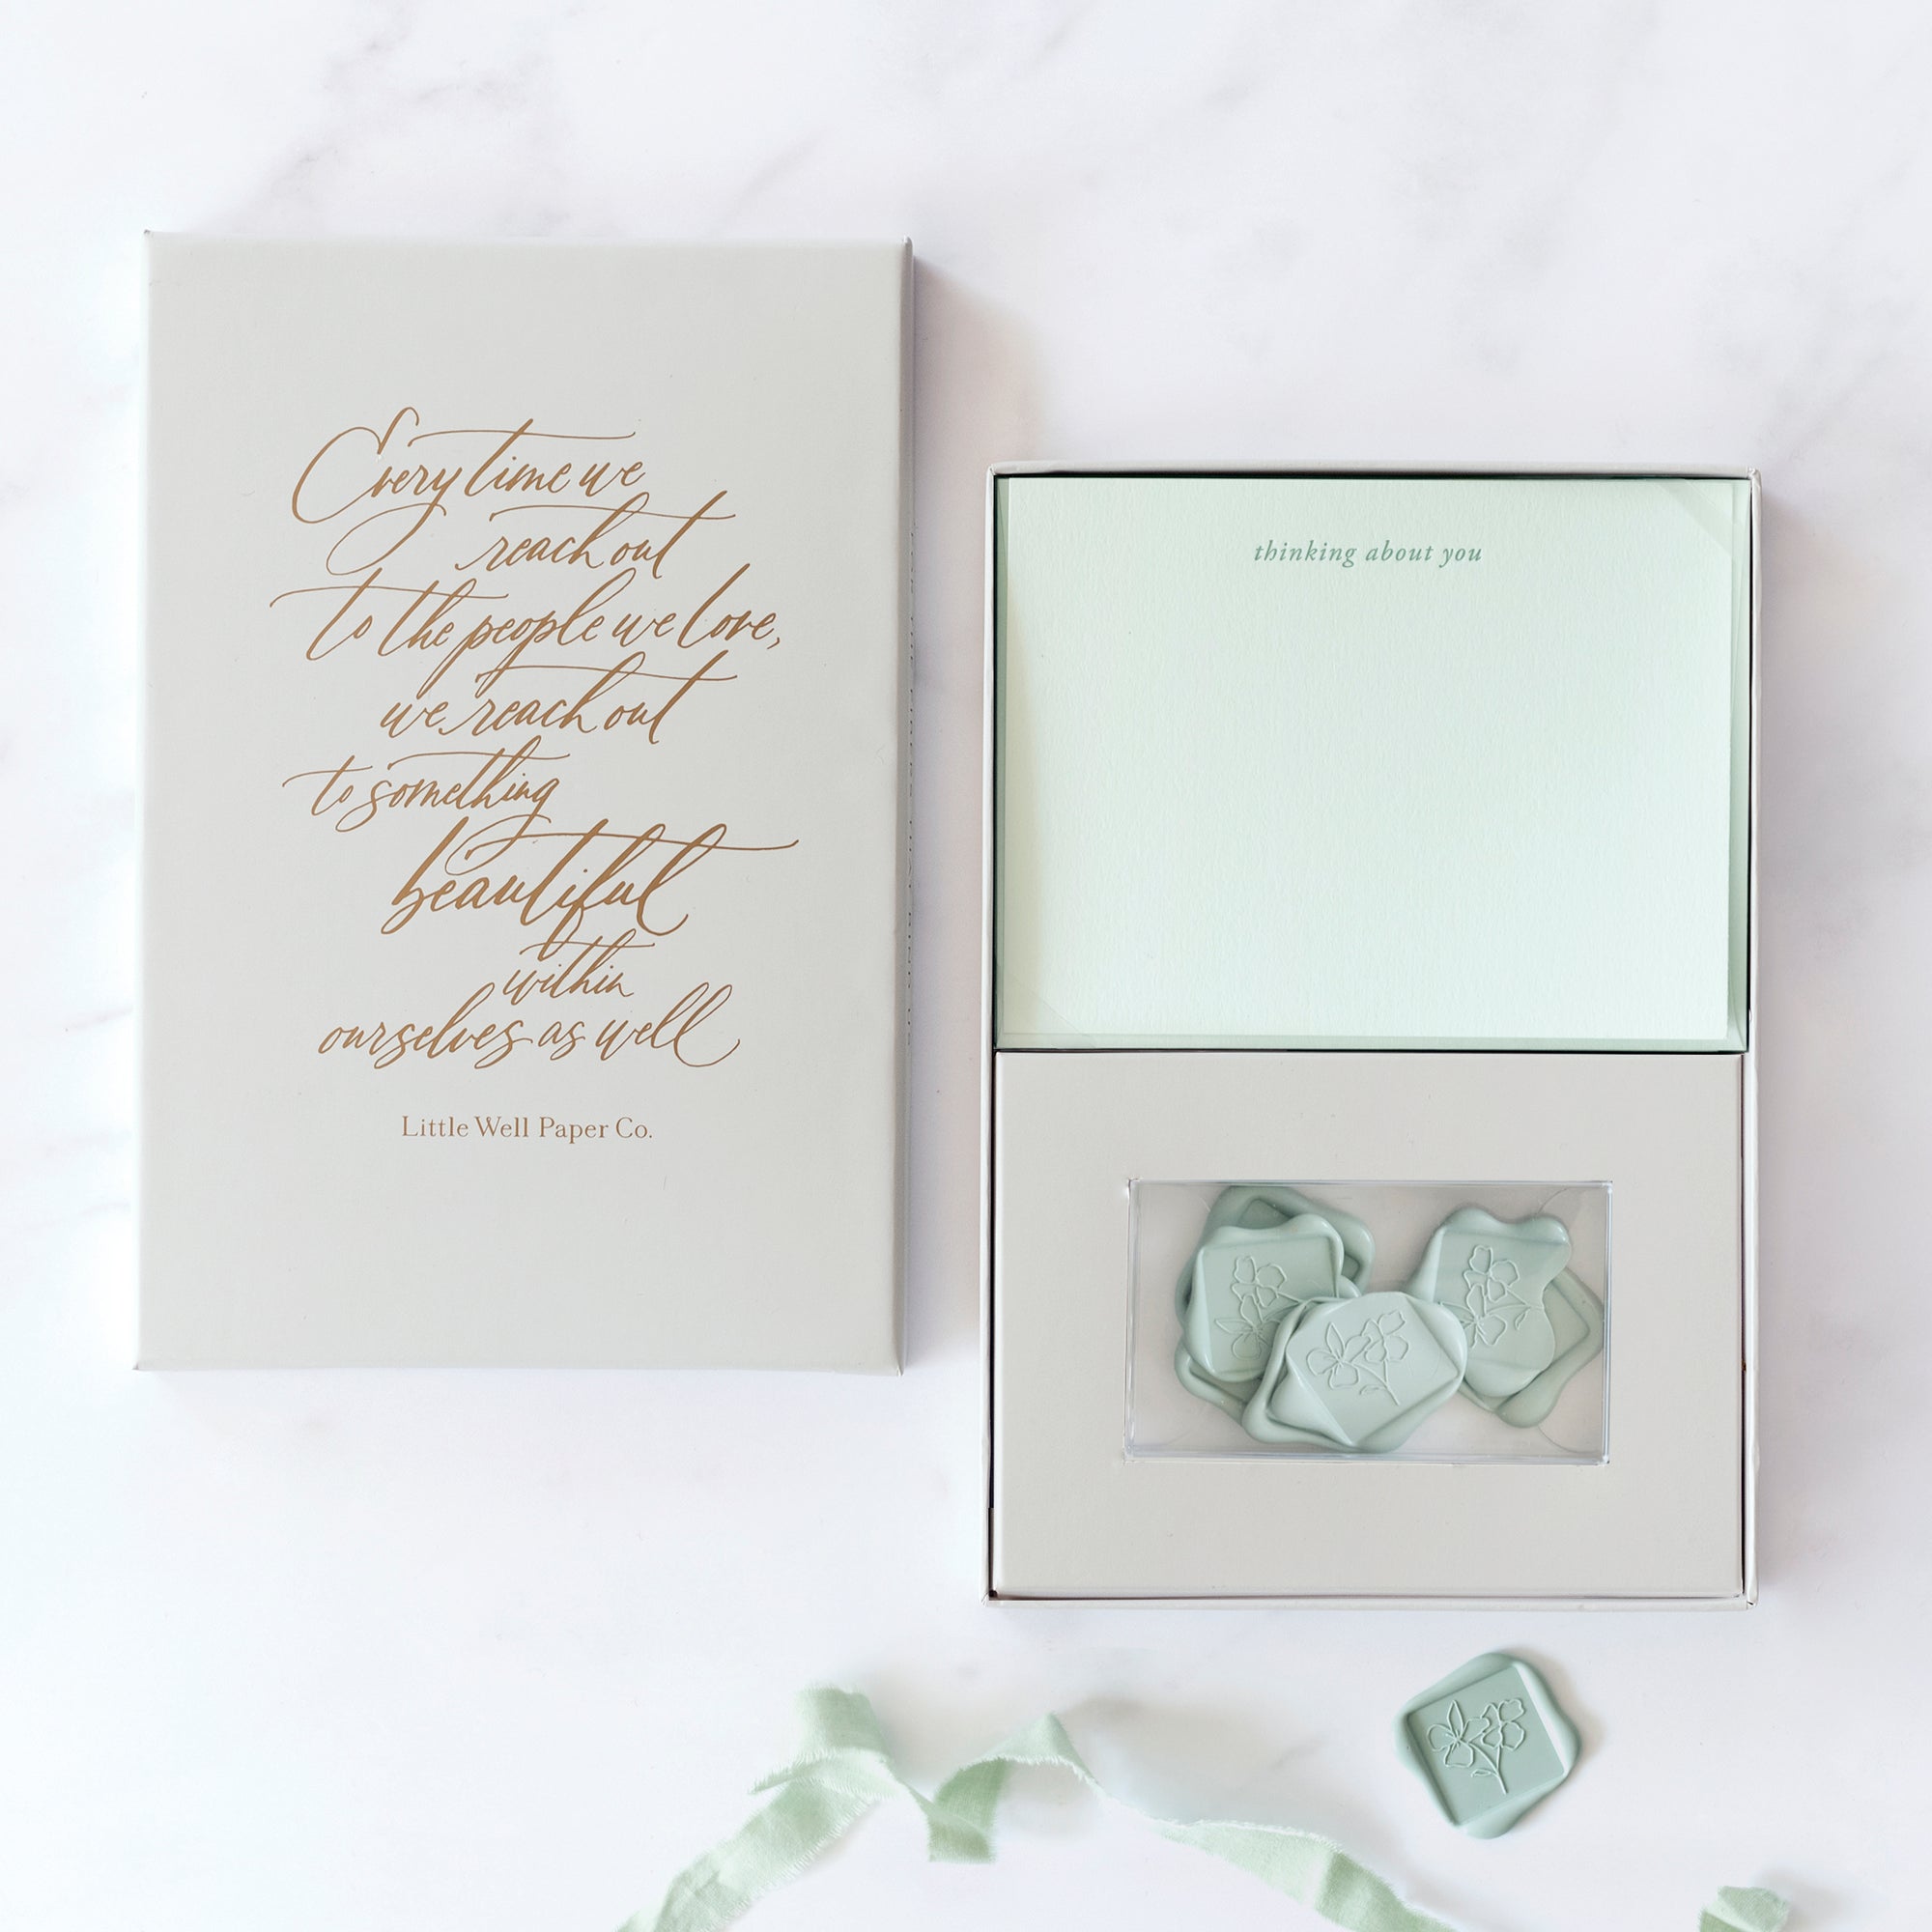 Our "Thinking of You" flat note stationery set includes a set of 6 hand printed cards and envelopes with 6 professional grade, self adhesive wax seals.